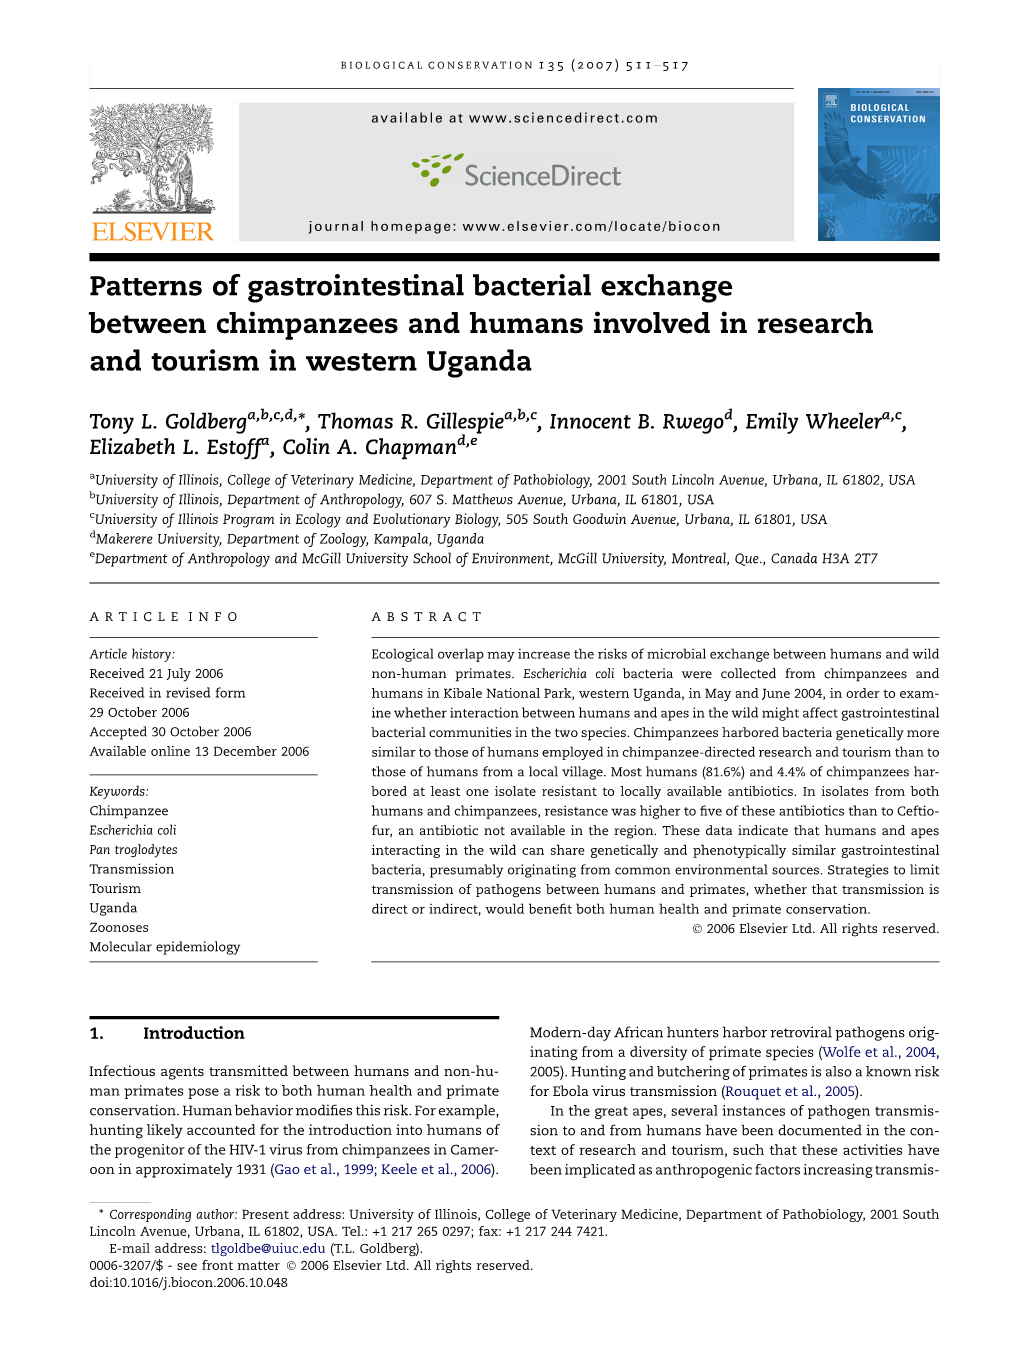 Patterns of Gastrointestinal Bacterial Exchange Between Chimpanzees and Humans Involved in Research and Tourism in Western Uganda